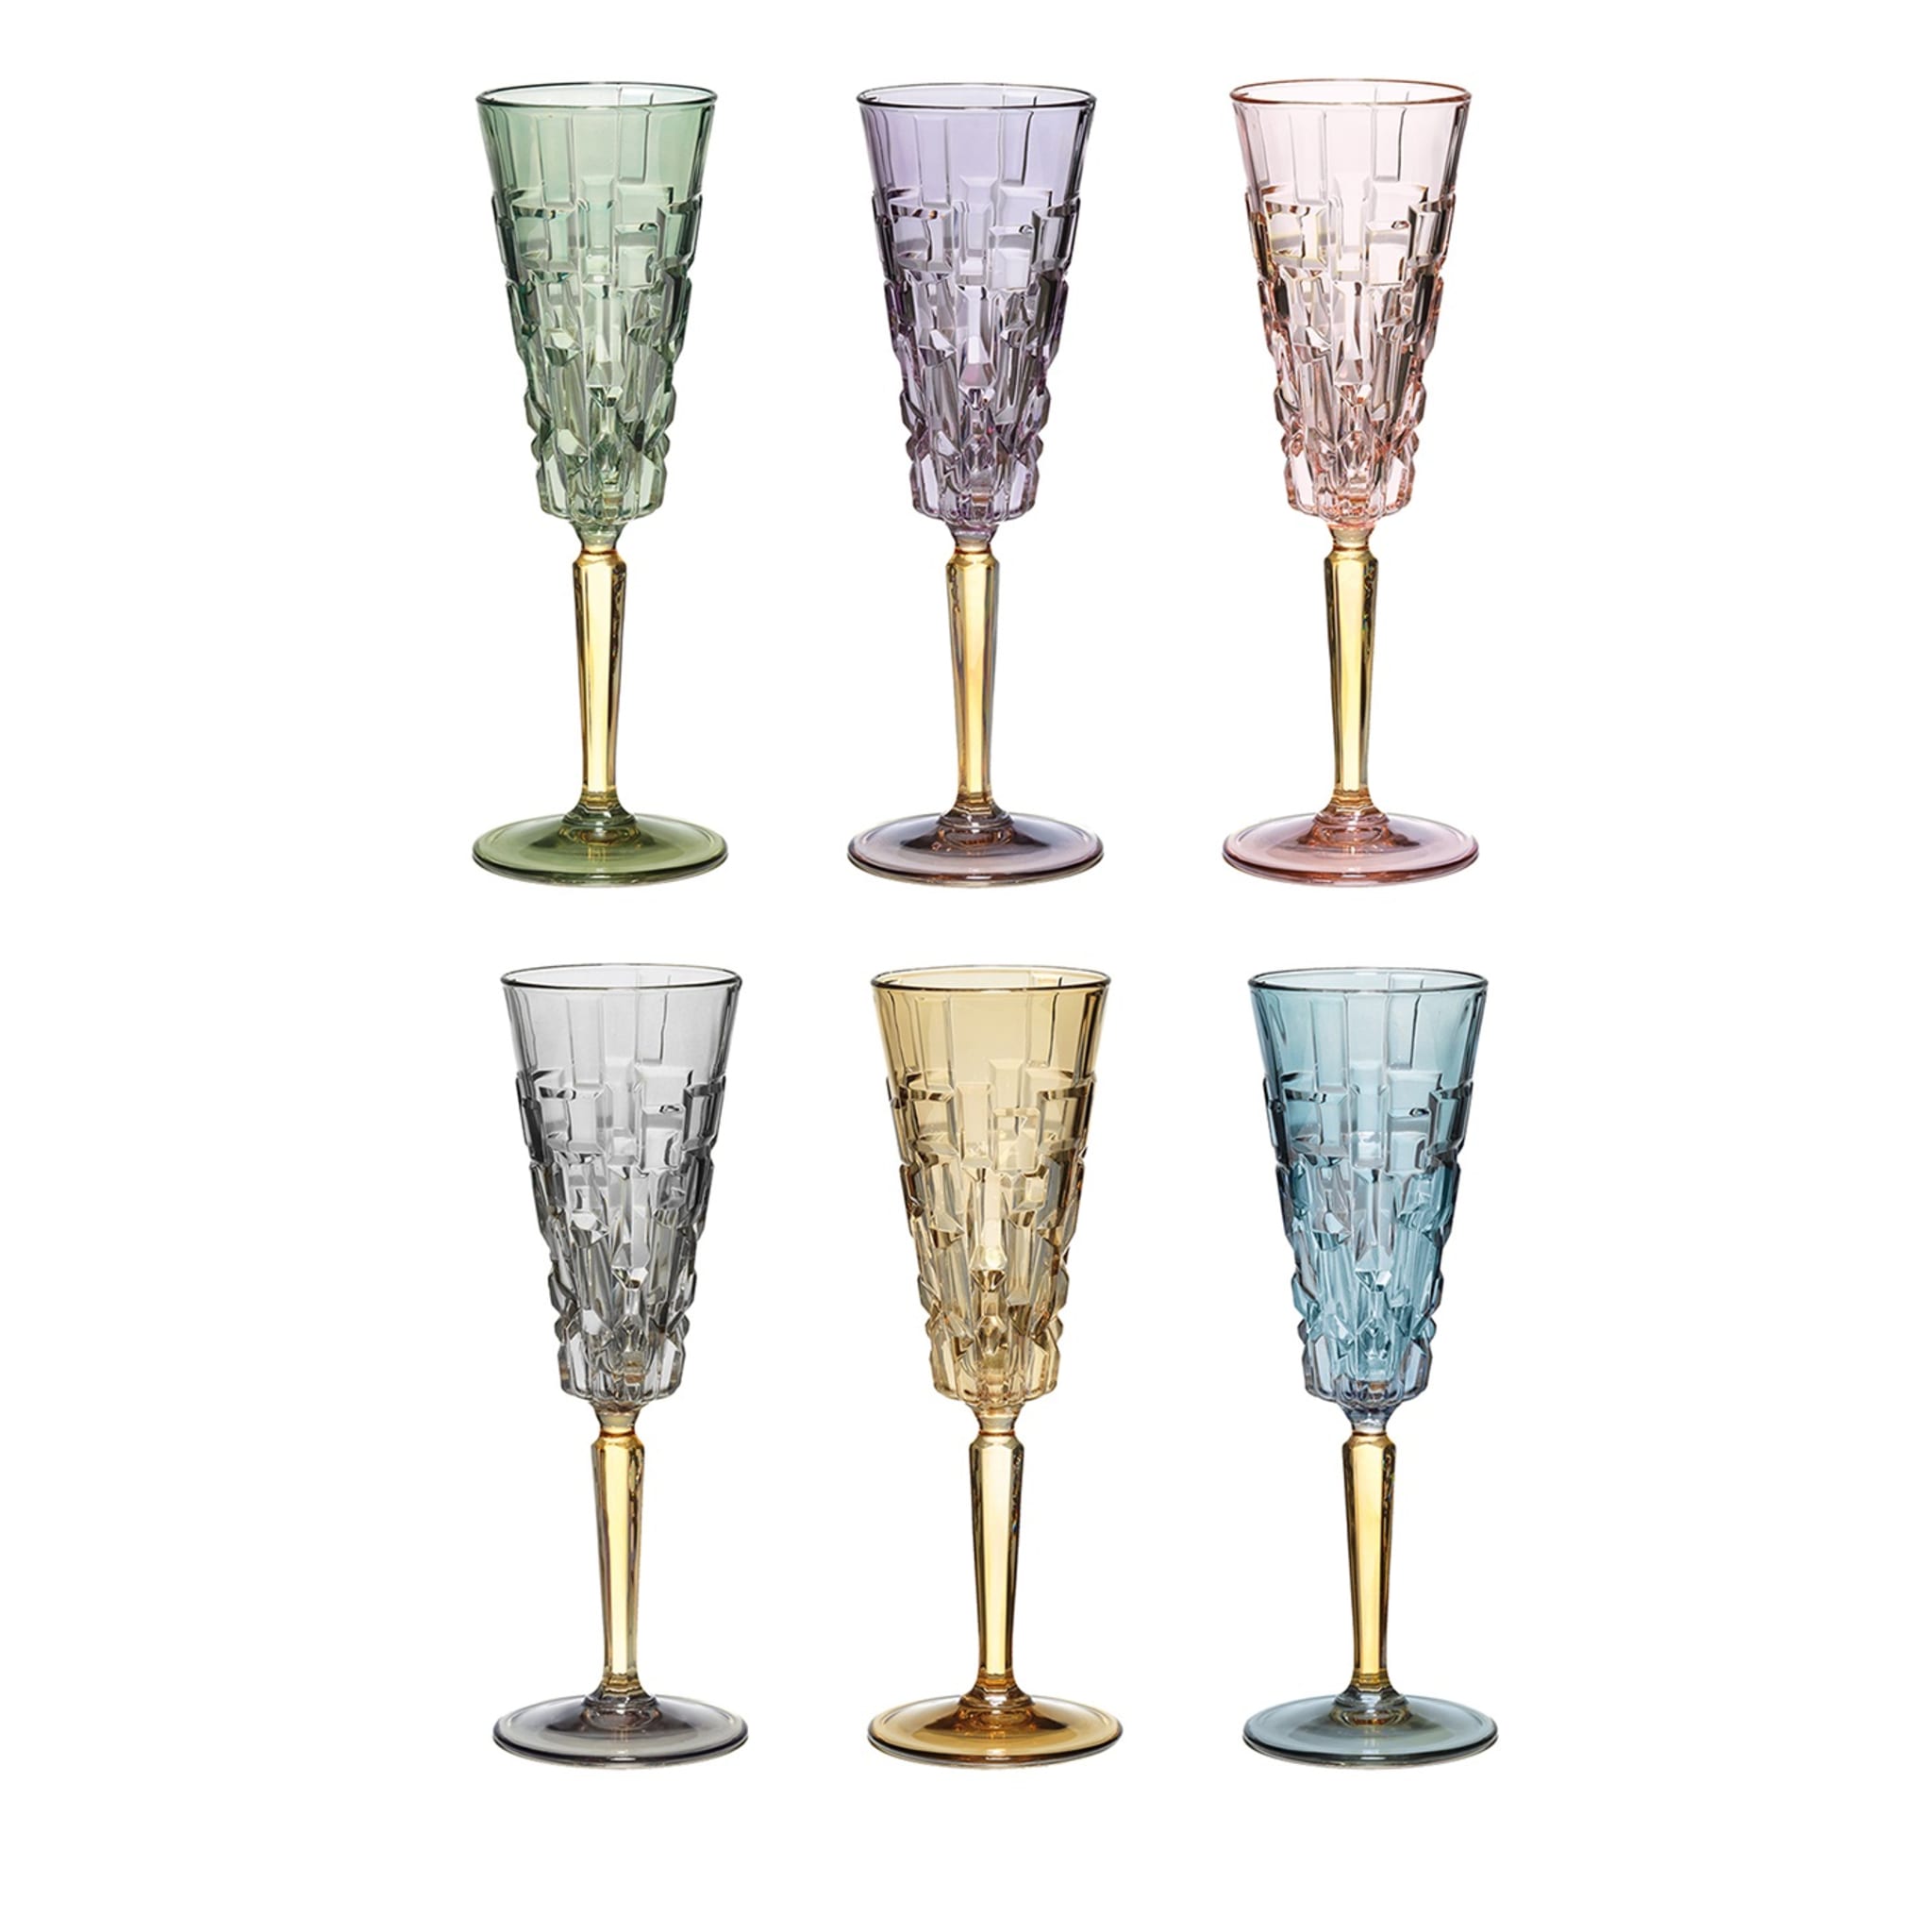 Cactus Mania Set of 4 Frosted Wine Glasses Casarialto